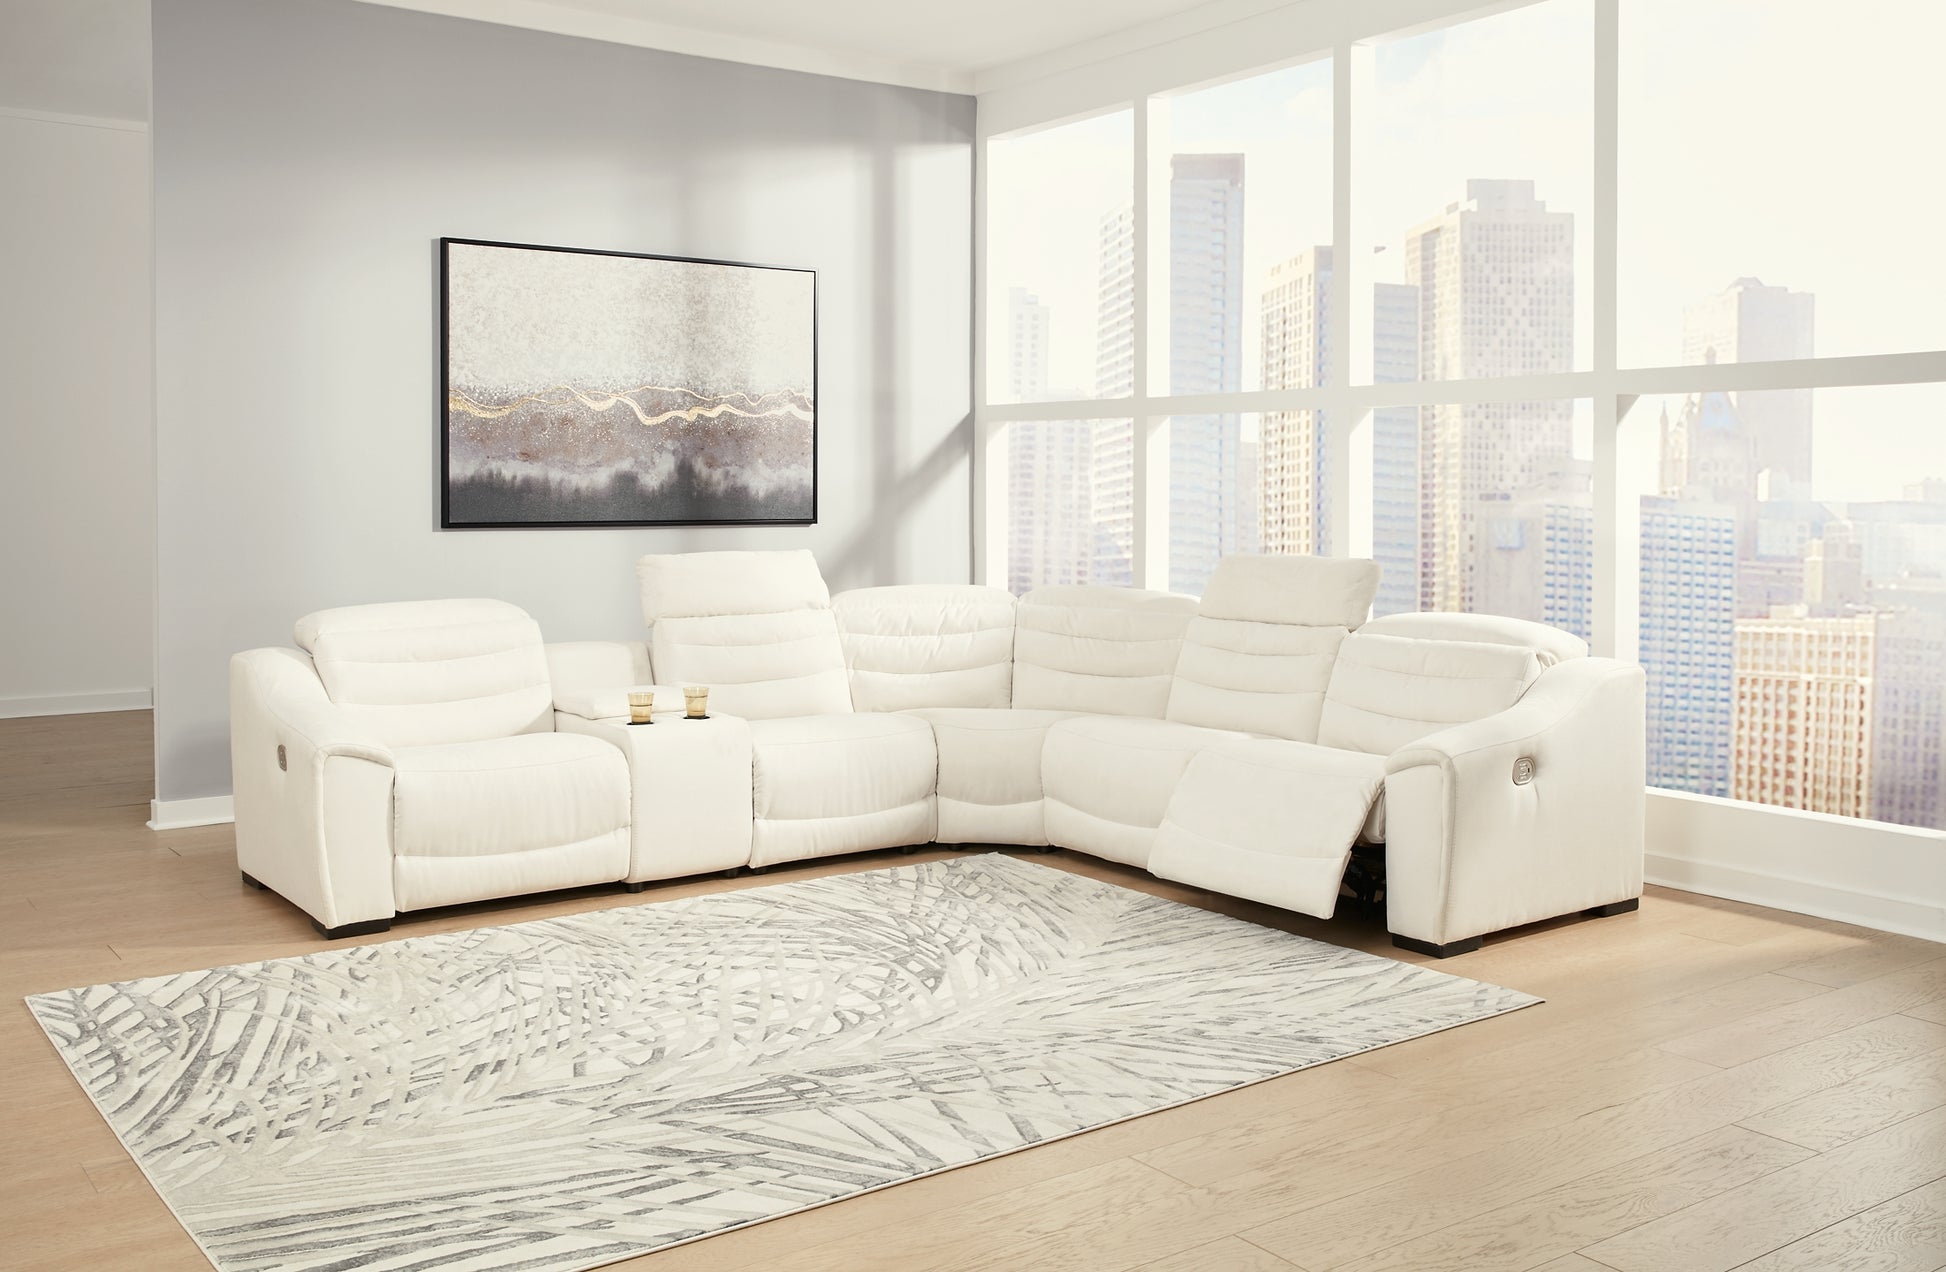 Next-Gen Gaucho 5-Piece Sectional with Recliner JB's Furniture  Home Furniture, Home Decor, Furniture Store